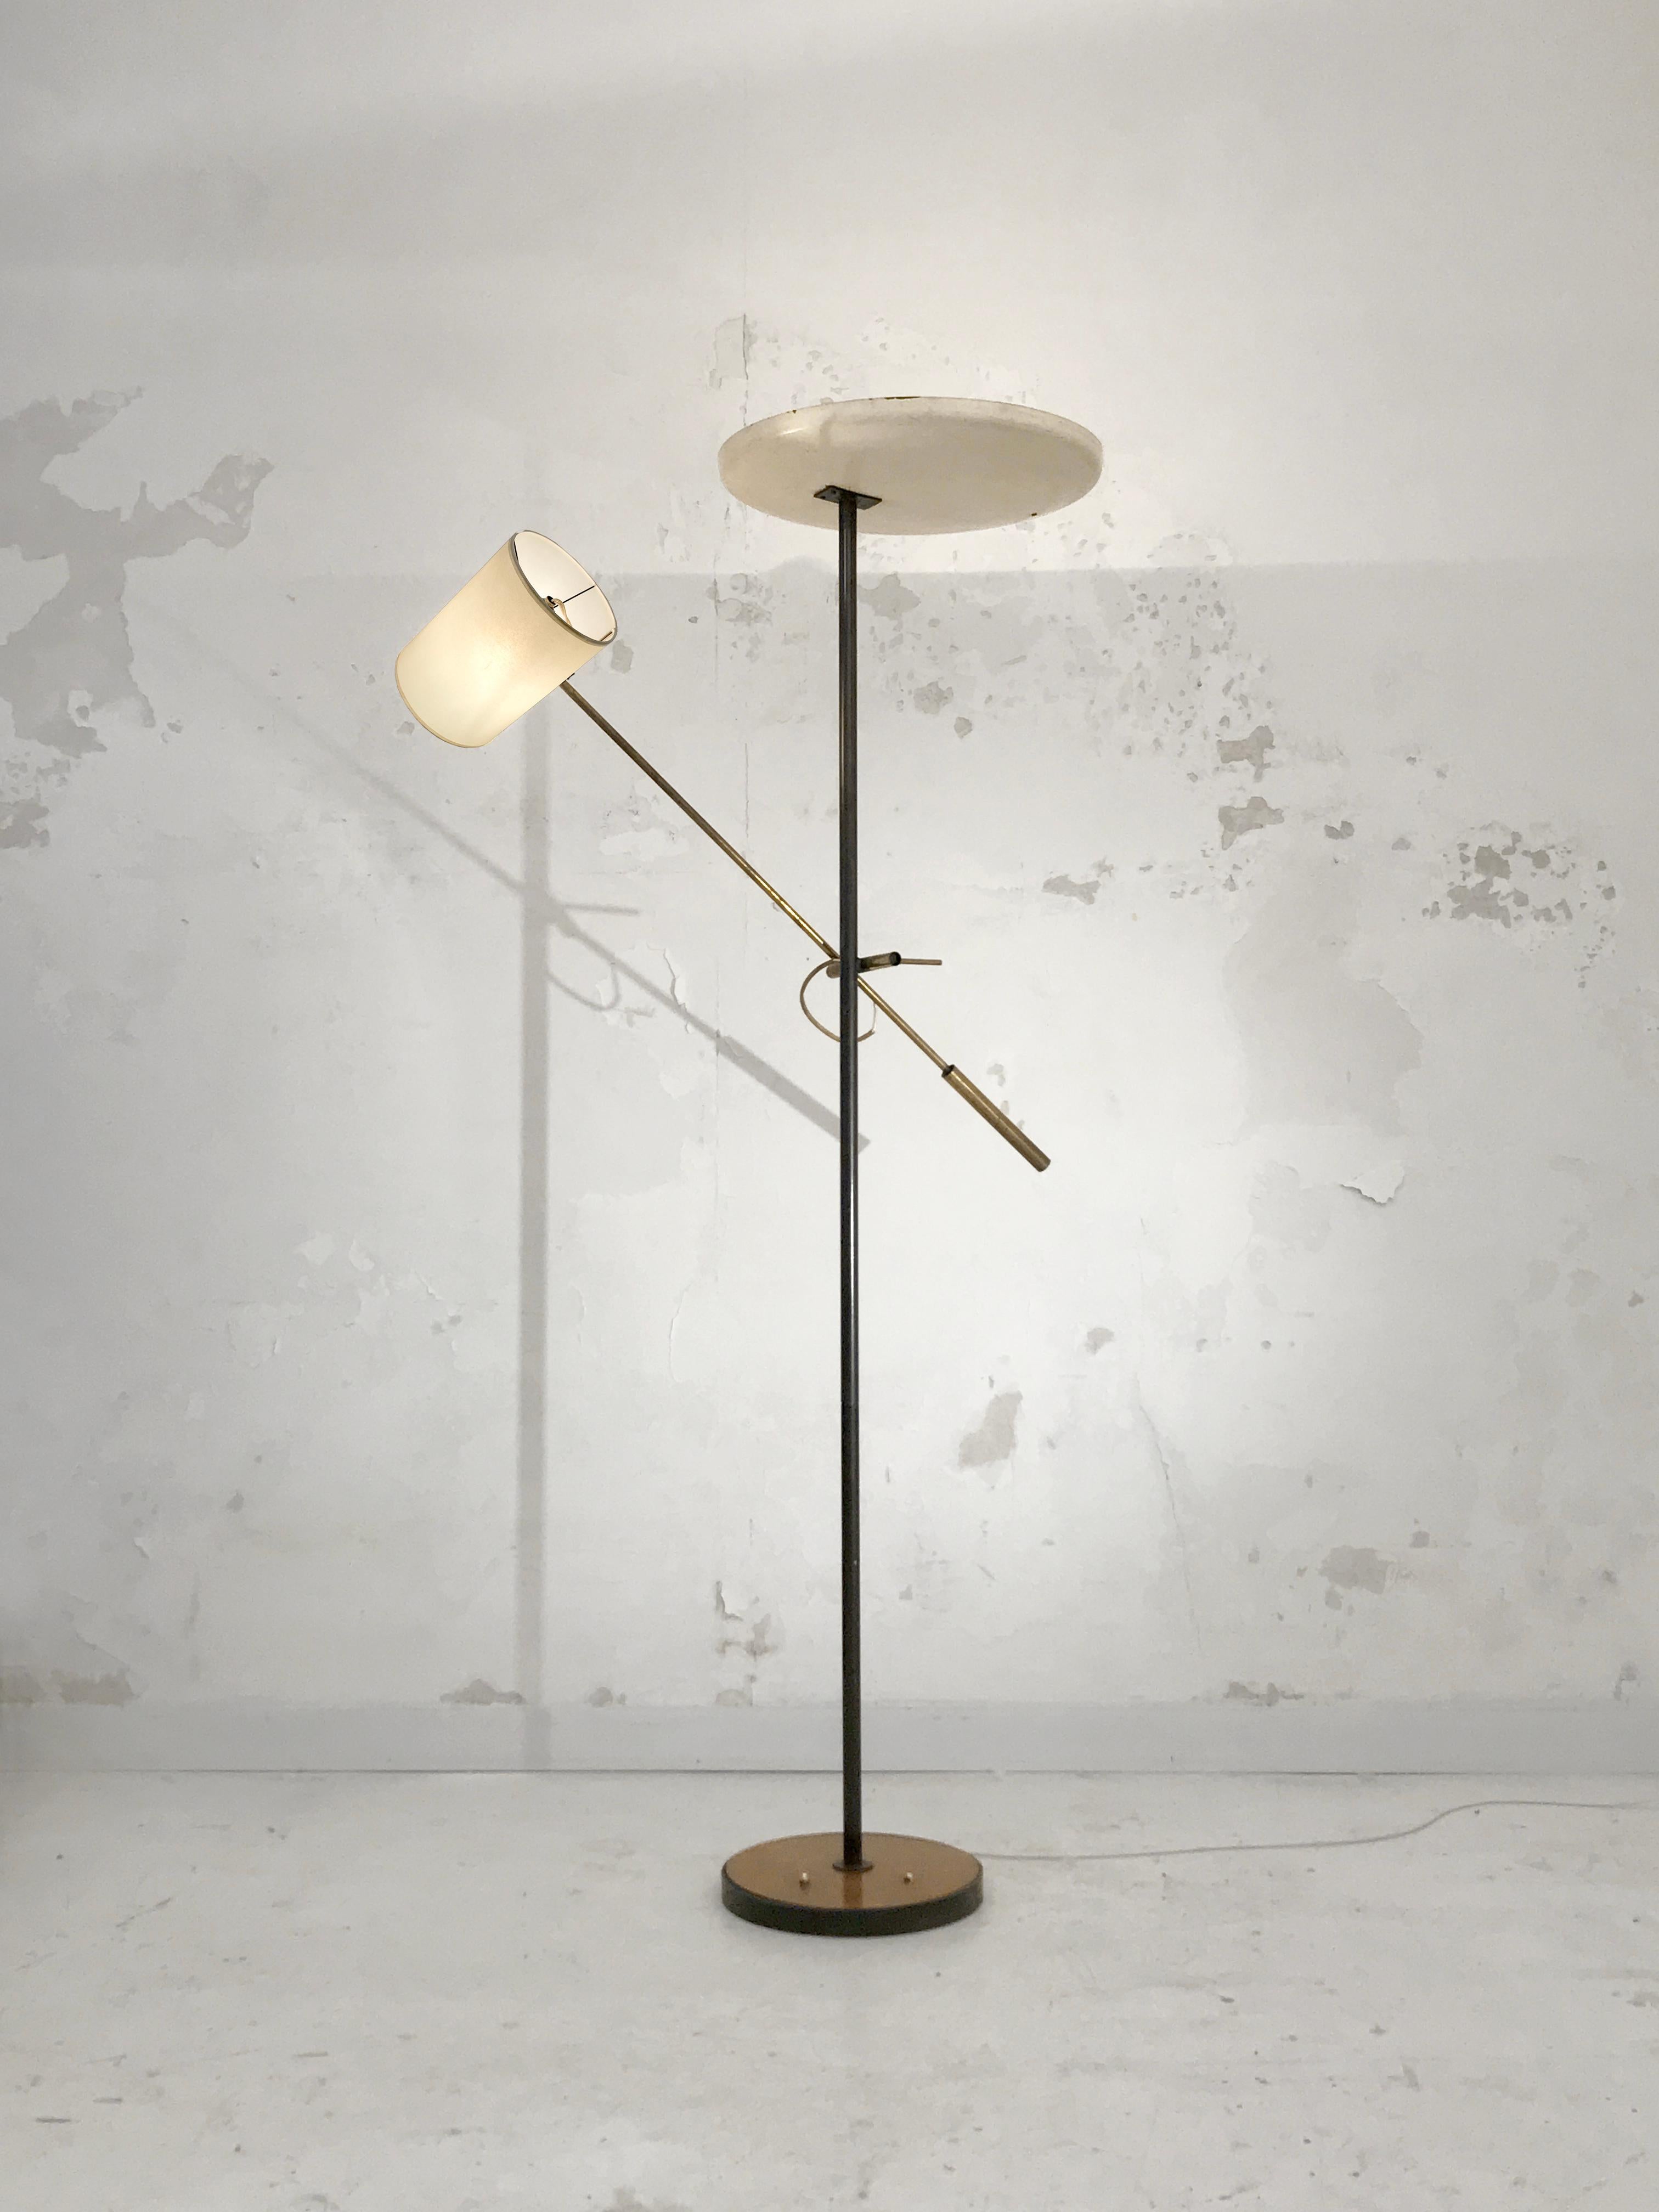 A spectacular counterweighted arm floorlamp, by Georges Frydman, produced by EFA, France 1950.
This rare model is a french masterpiece in the spirit of Gino Sarfatti's early creation :
A simple circular wood base with 2 switches allowing to light